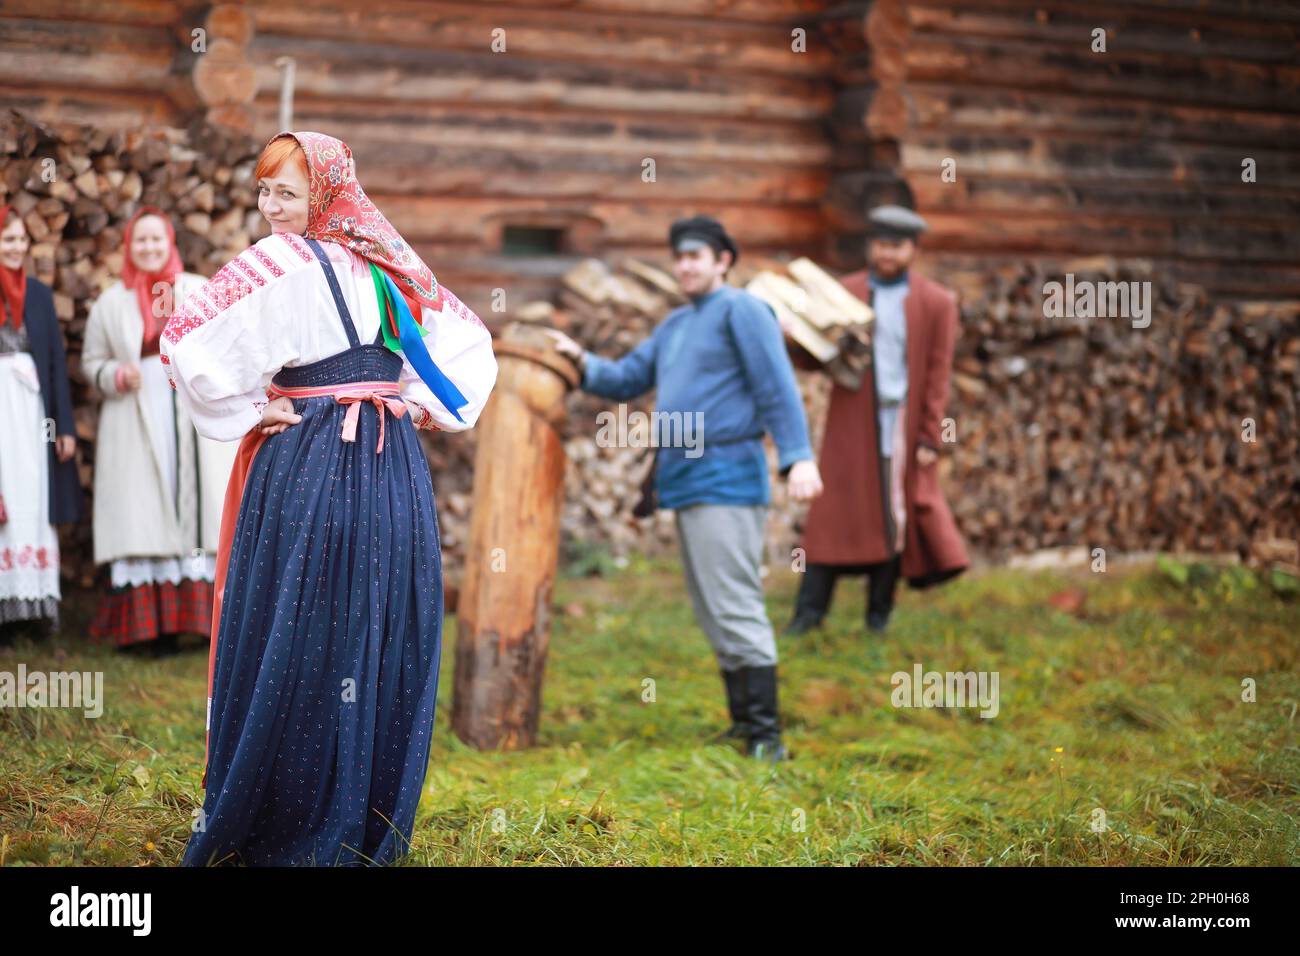 The concept of ancient traditions. Slavic carnival. Rites, dances ...